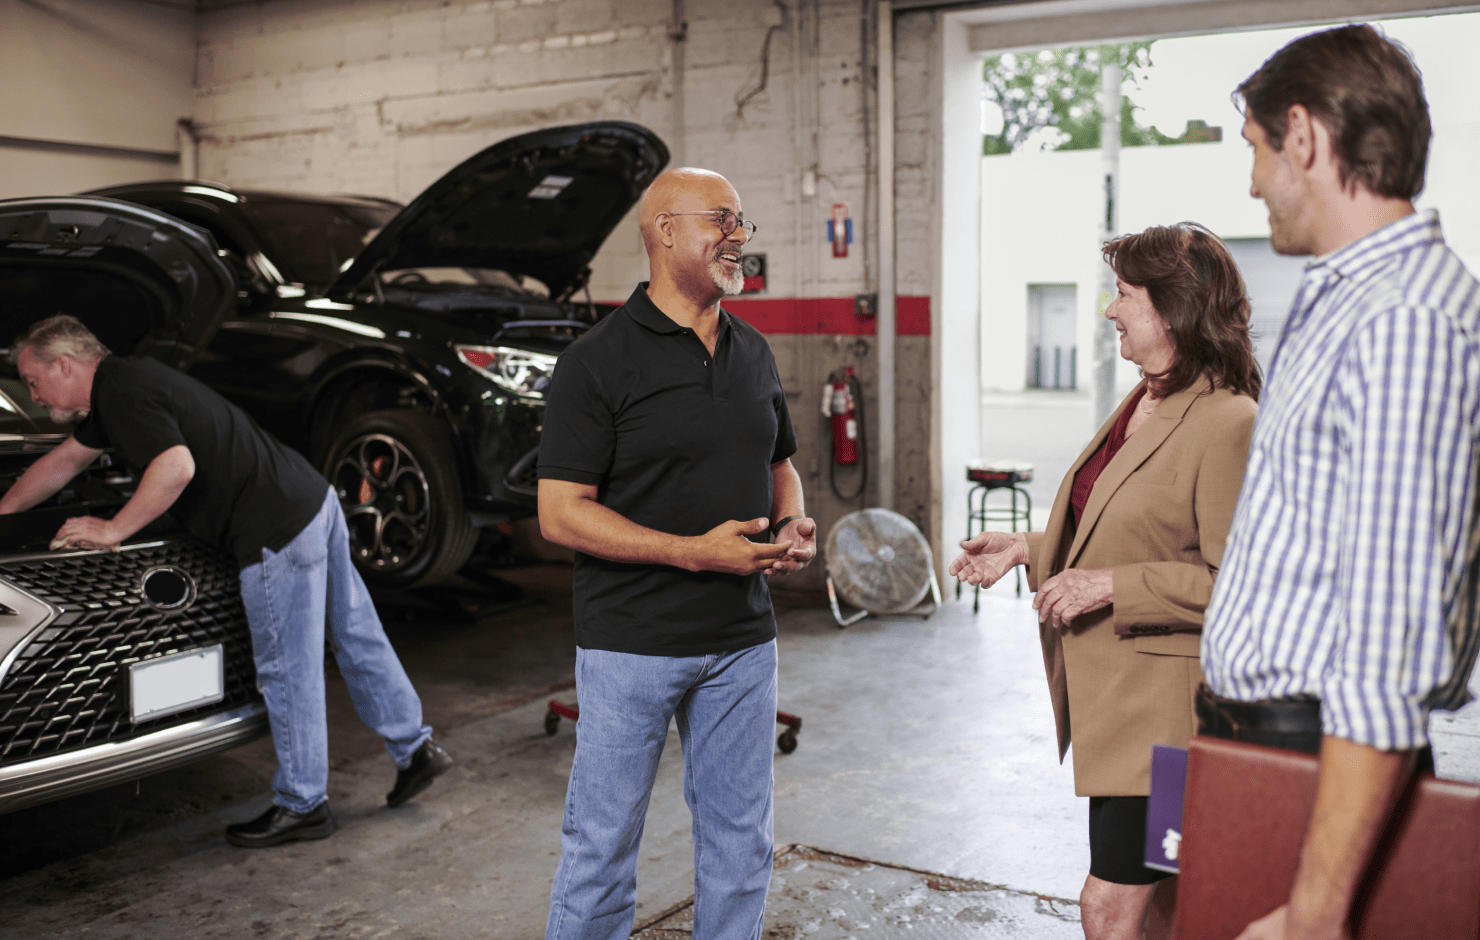 A group of people are smiling and talking in an auto body garage. A man is standing in the background actively working on the engine of a car.